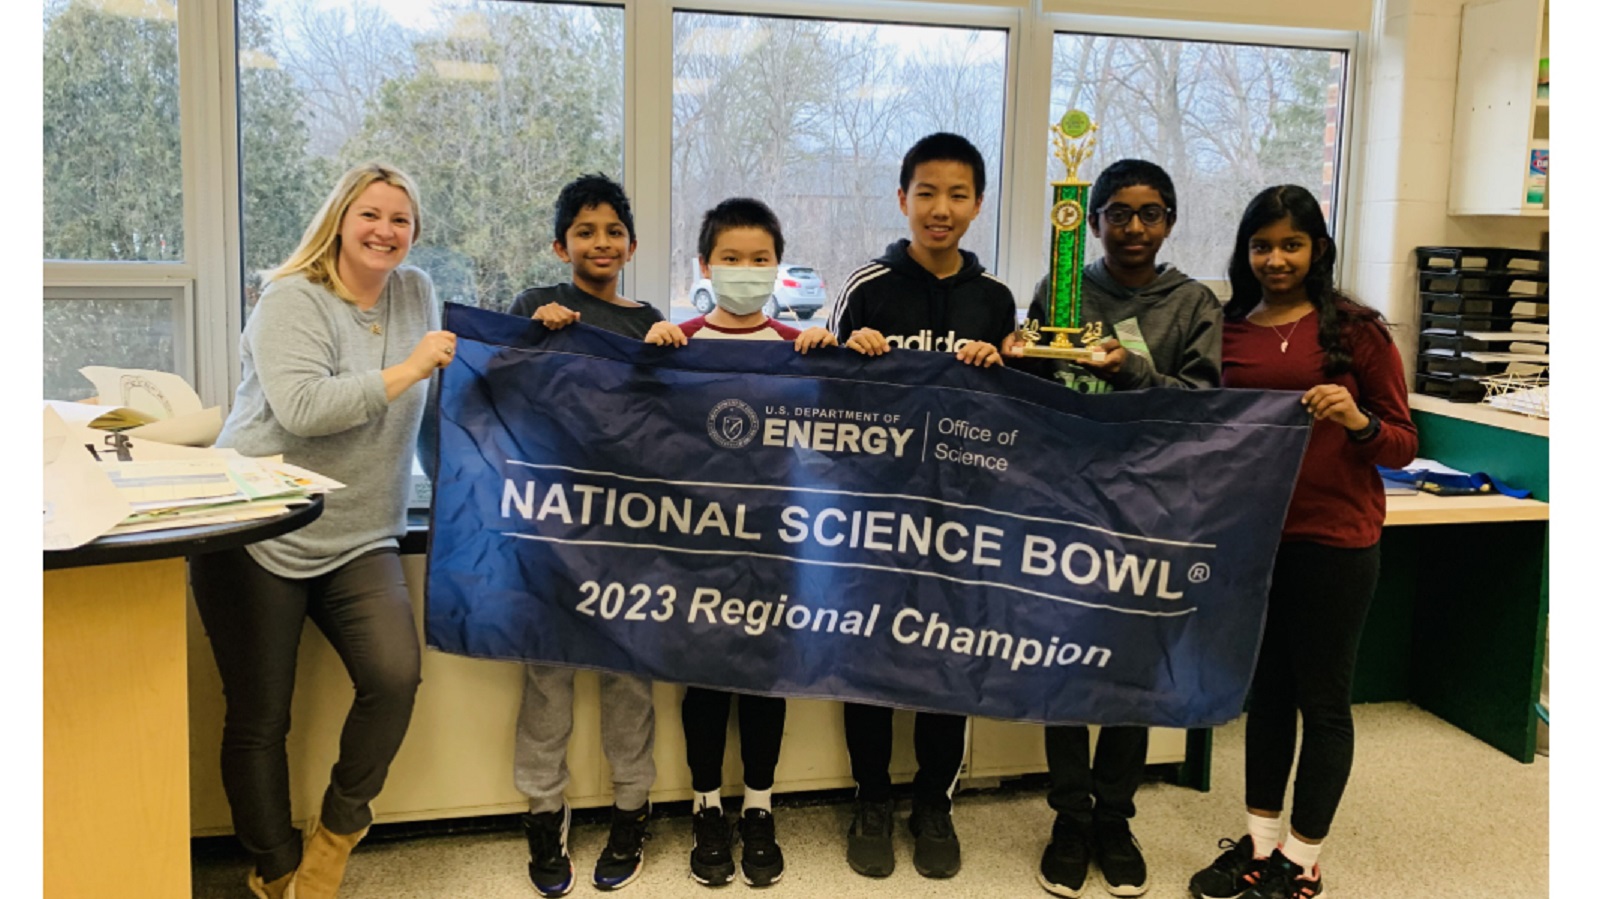 This year, Daniel Wright Junior High School’s teams placed first and second at the regional Science Bowl, with the first-place team participating in the national competition on Apr. 27.